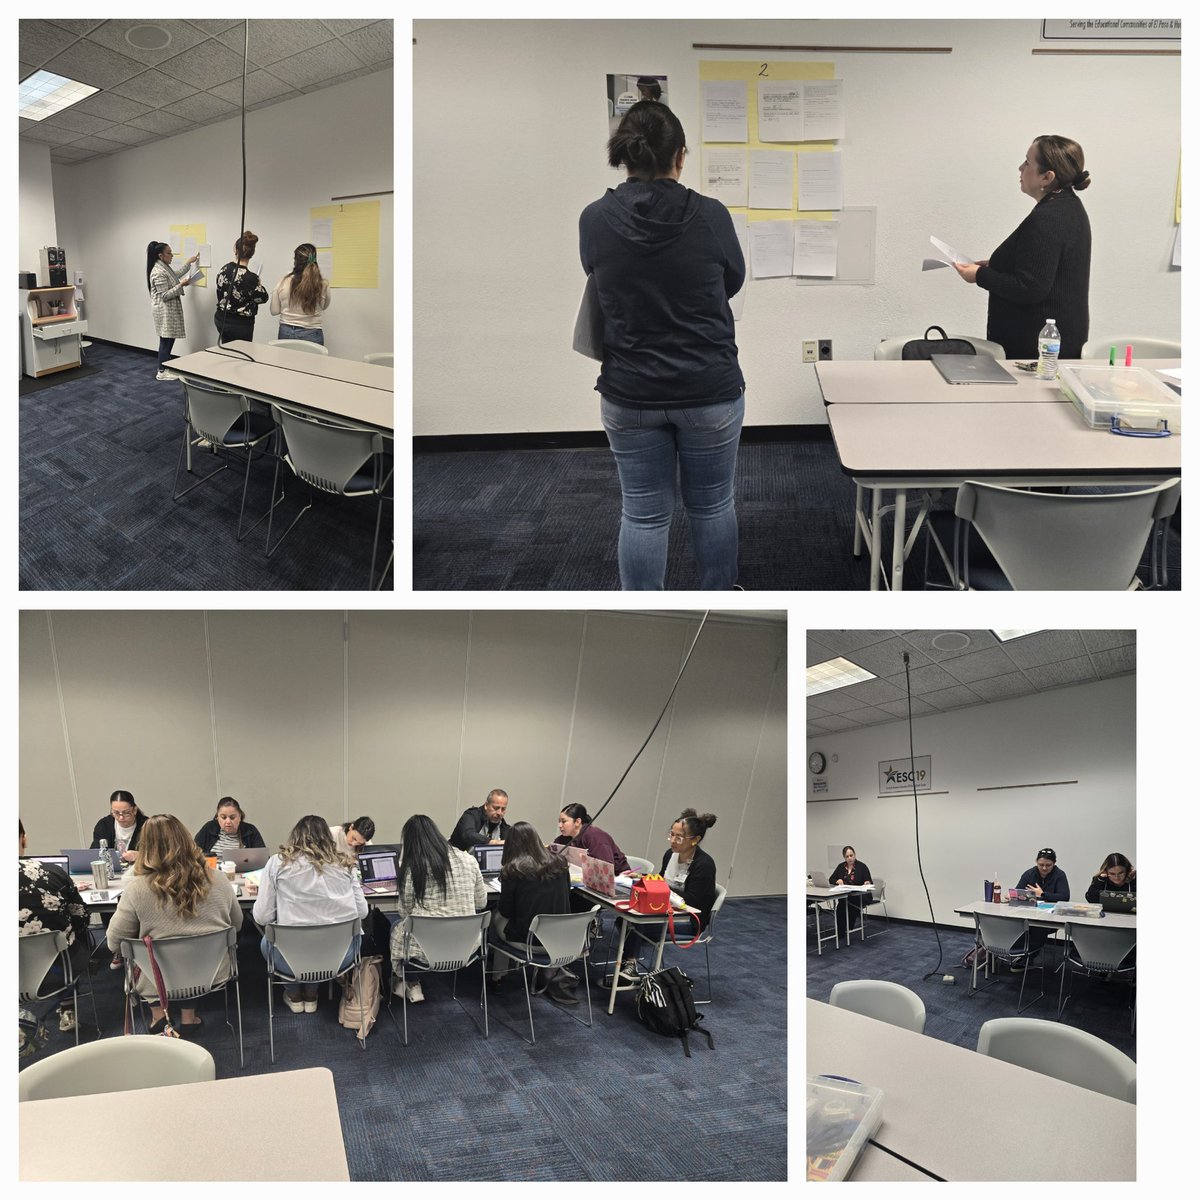 Internalizing the assessed curriculum ✅️ Analyzing data ✅️ Rating ECRs ✅️ These driven educators are ready to lead their students on their road to STAAR! #WeR19